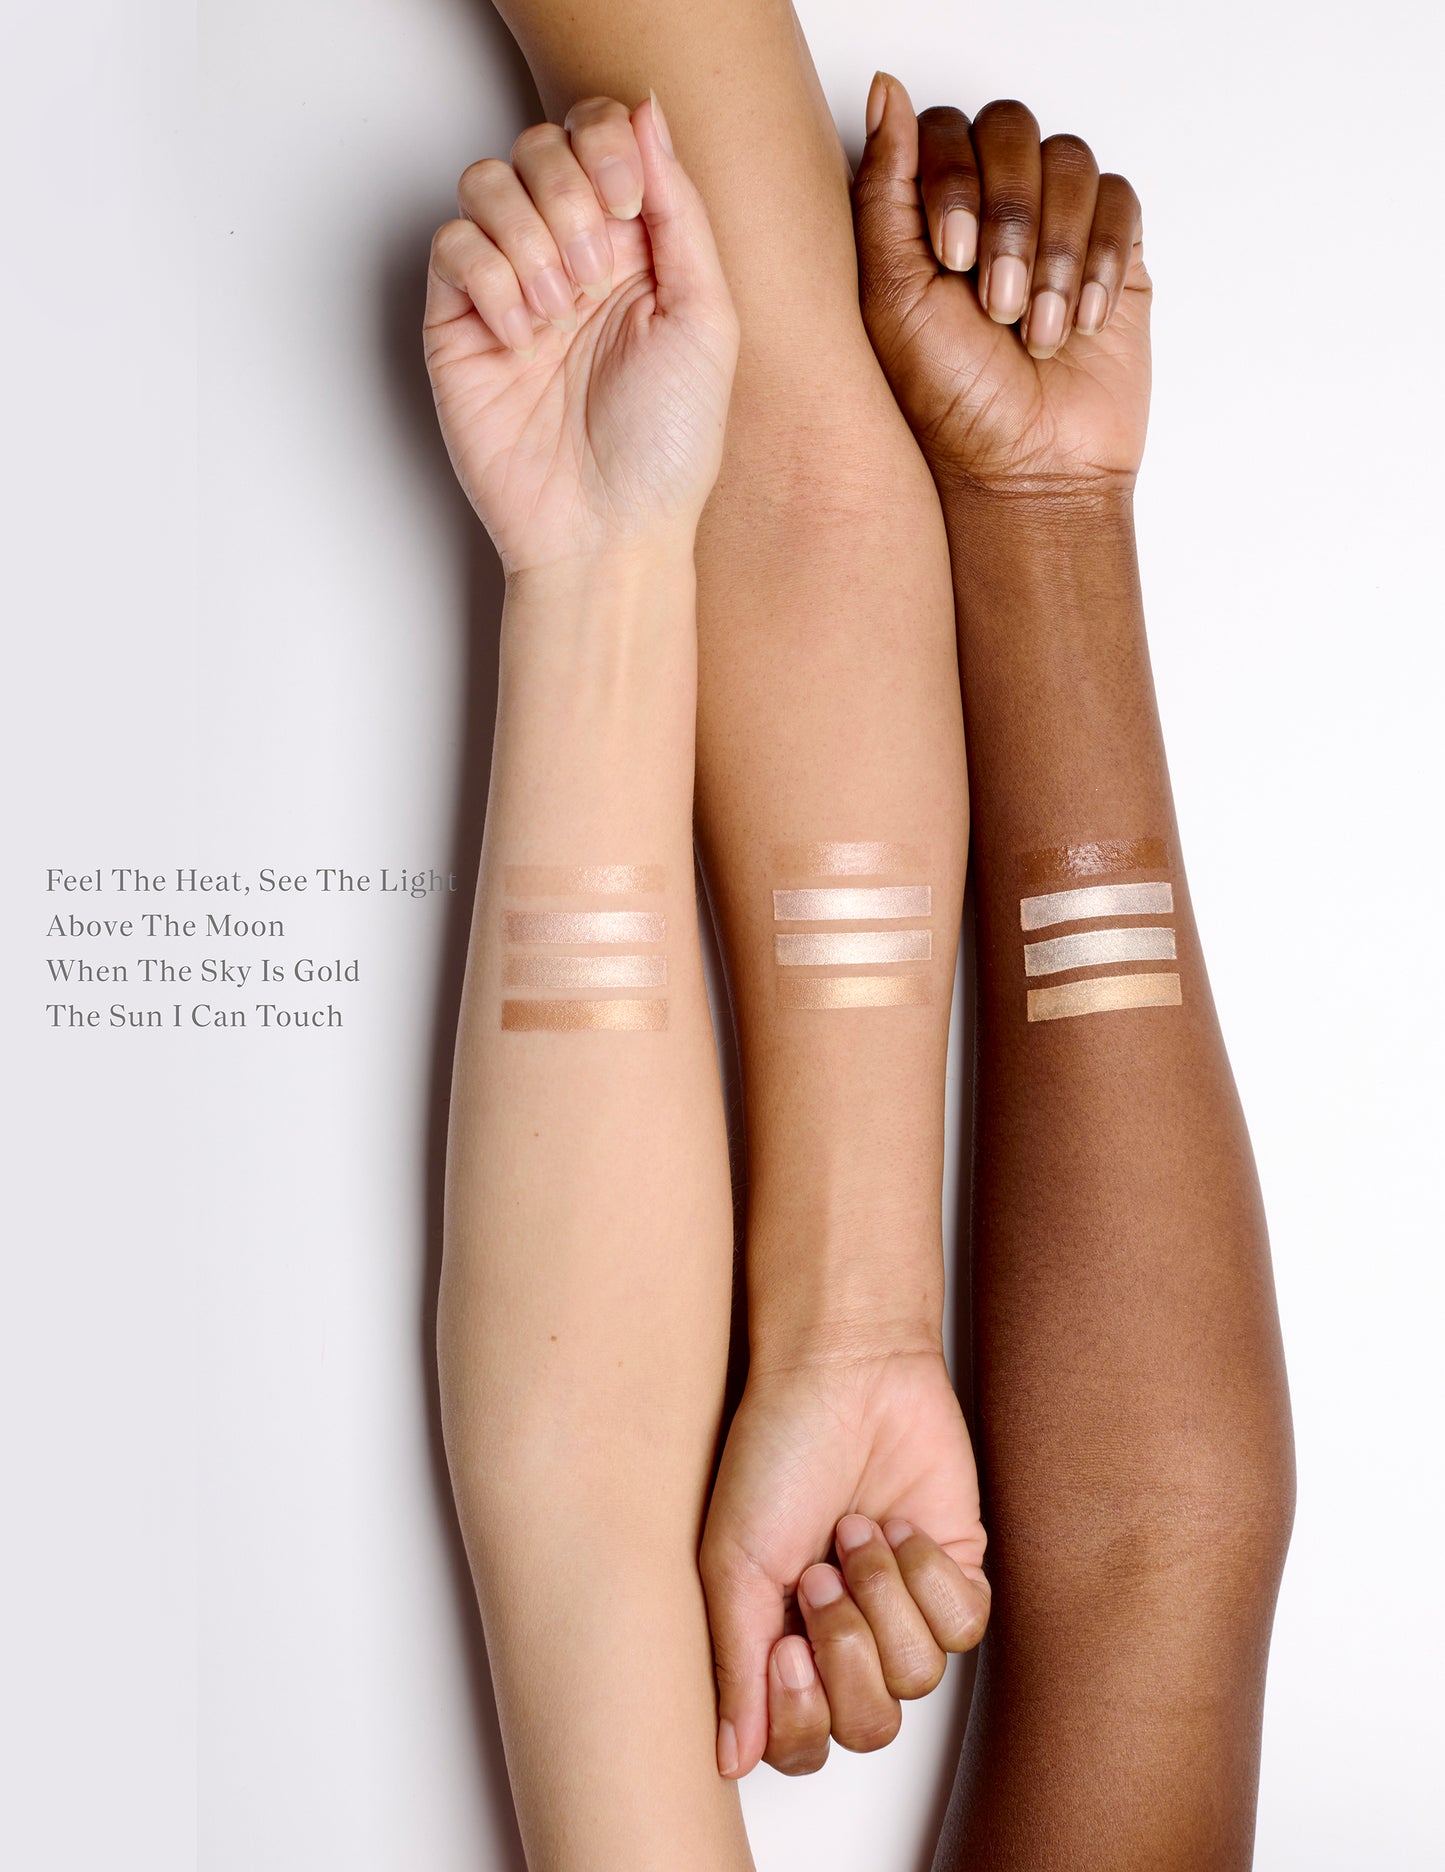 Three arms lined up next to each other with cream highlighter swatches on the skin.  There are four swatch stripes on each of the three arms. The arm on the left is fair, the middle is golden and the arm on the right is deep. Their nails are unpainted and their hands are semi-closed in a relaxed state.